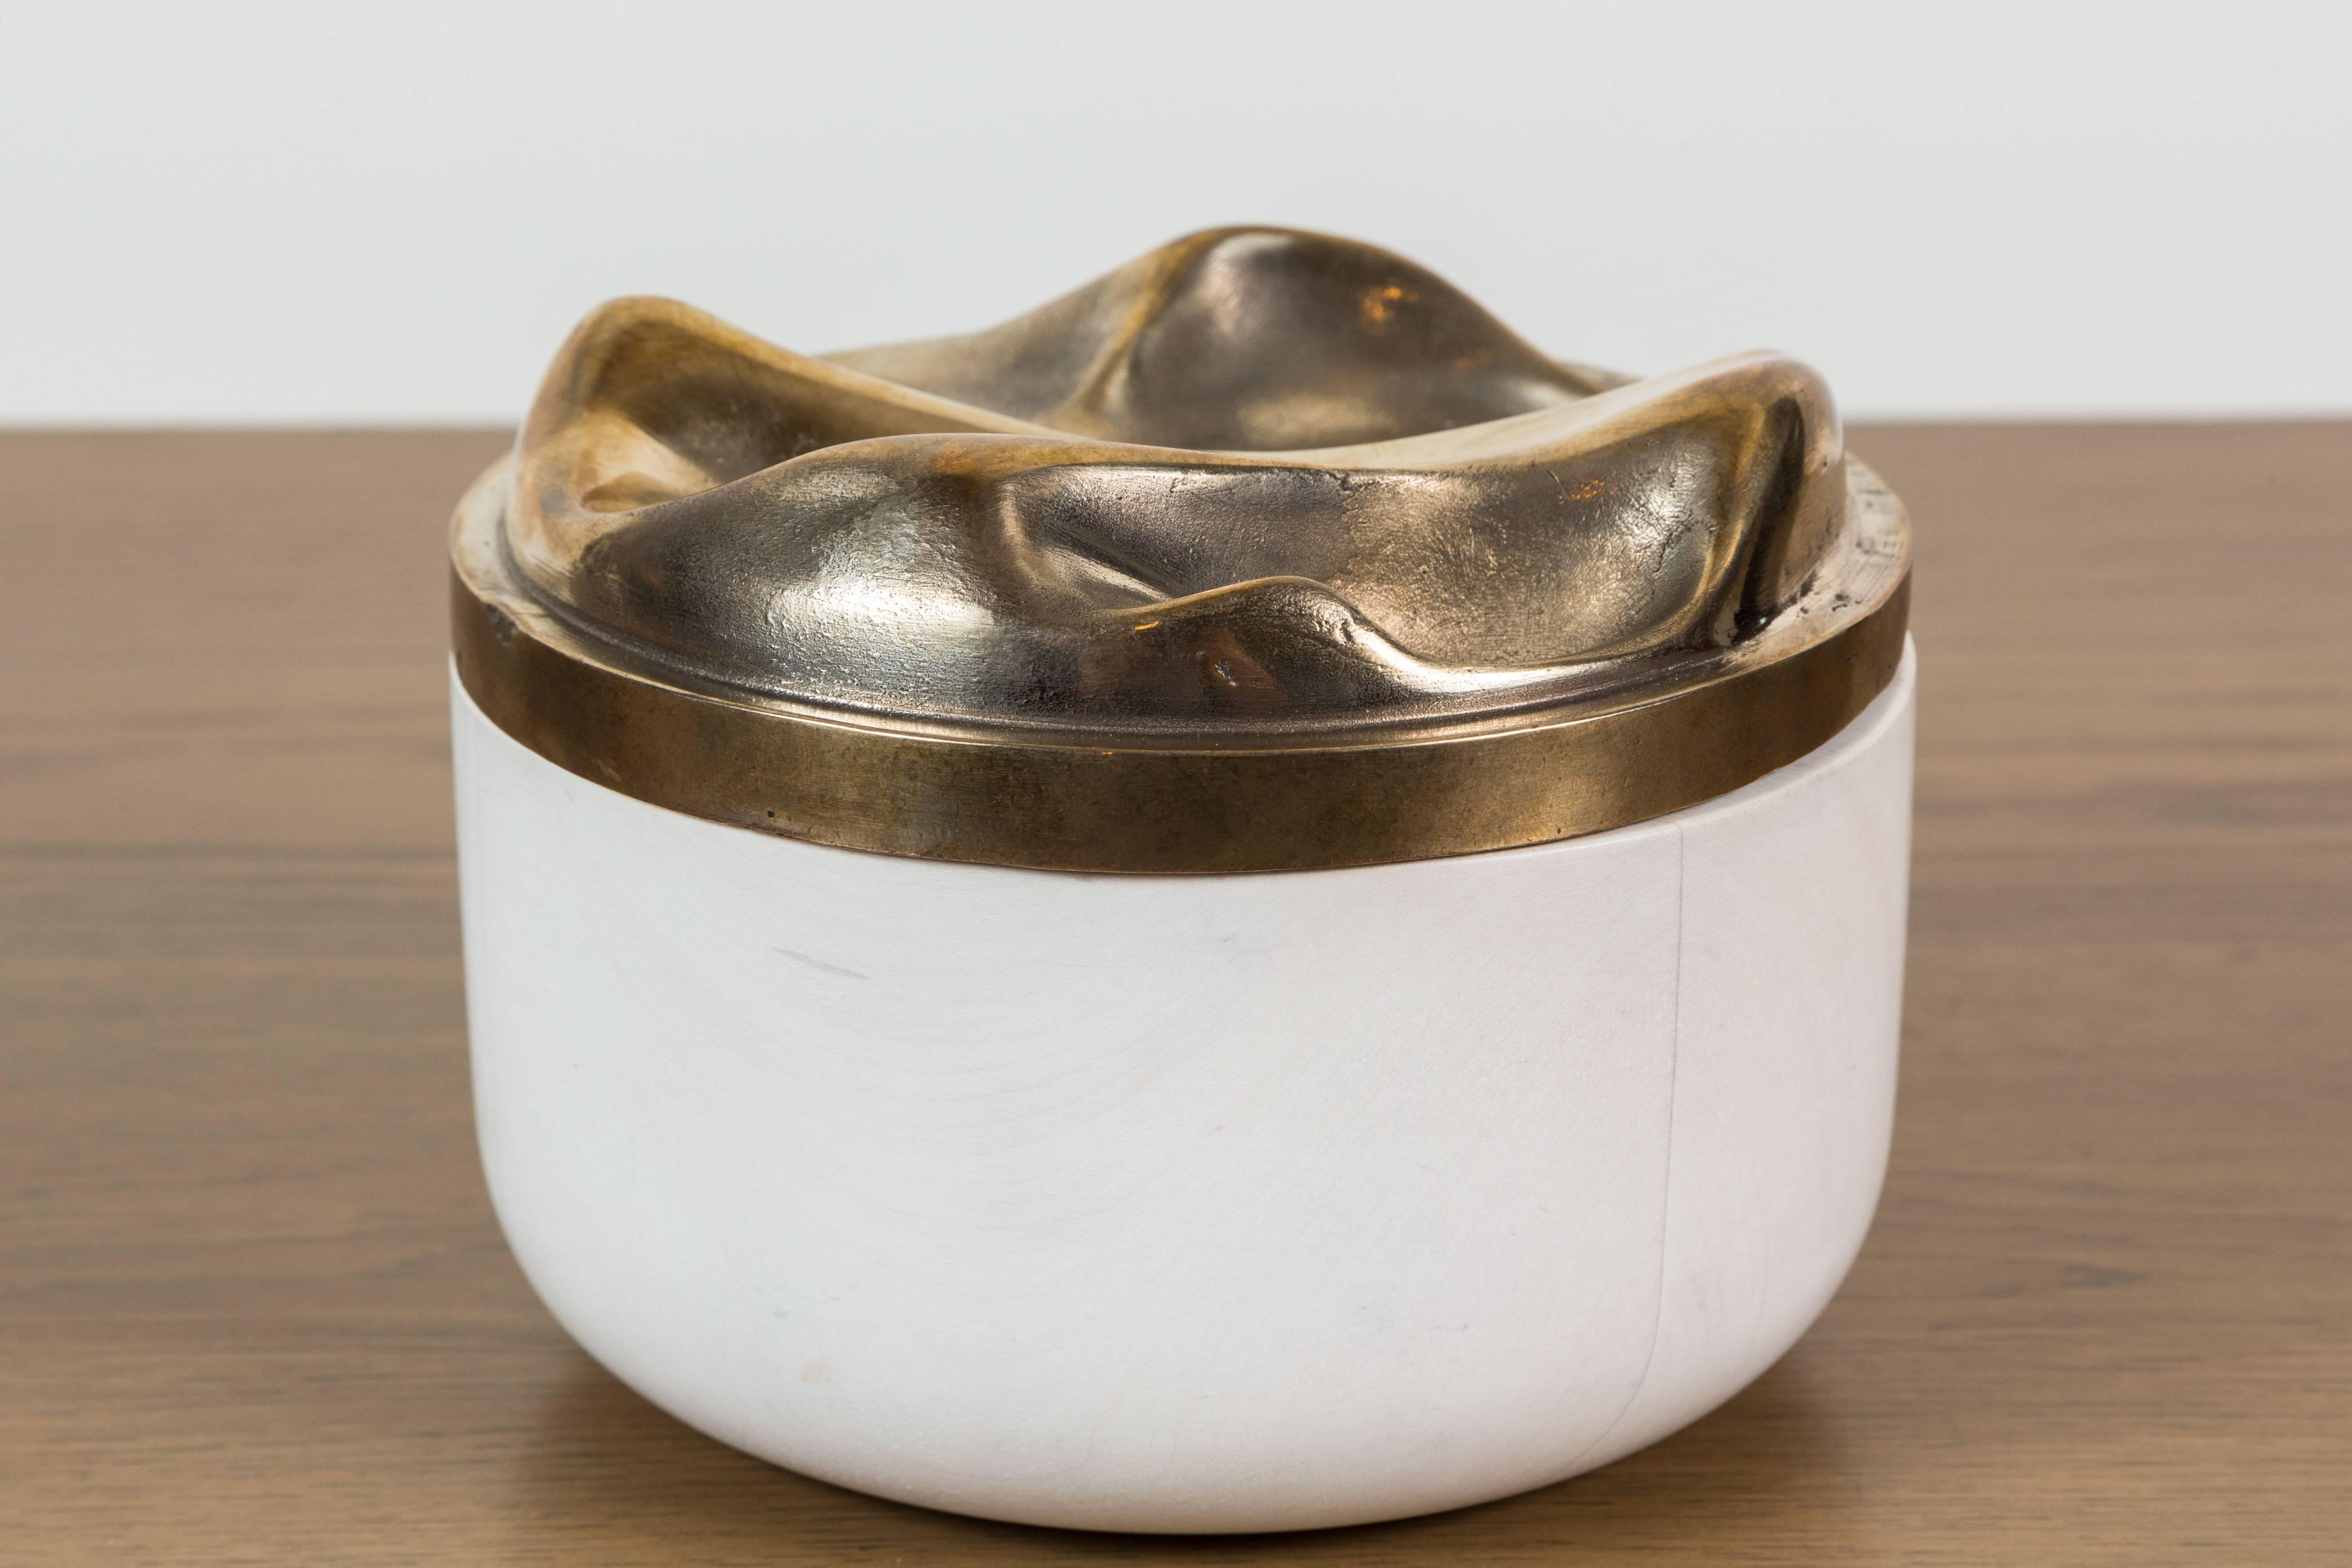 Bleached maple and cast bronze round box by artist Vincent Pocsik in collaboration with Lawson-Fenning. Features a sculptural carved wood interior. Made of natural materials, this decorative object can be accessorized on tabletop, book shelf, or